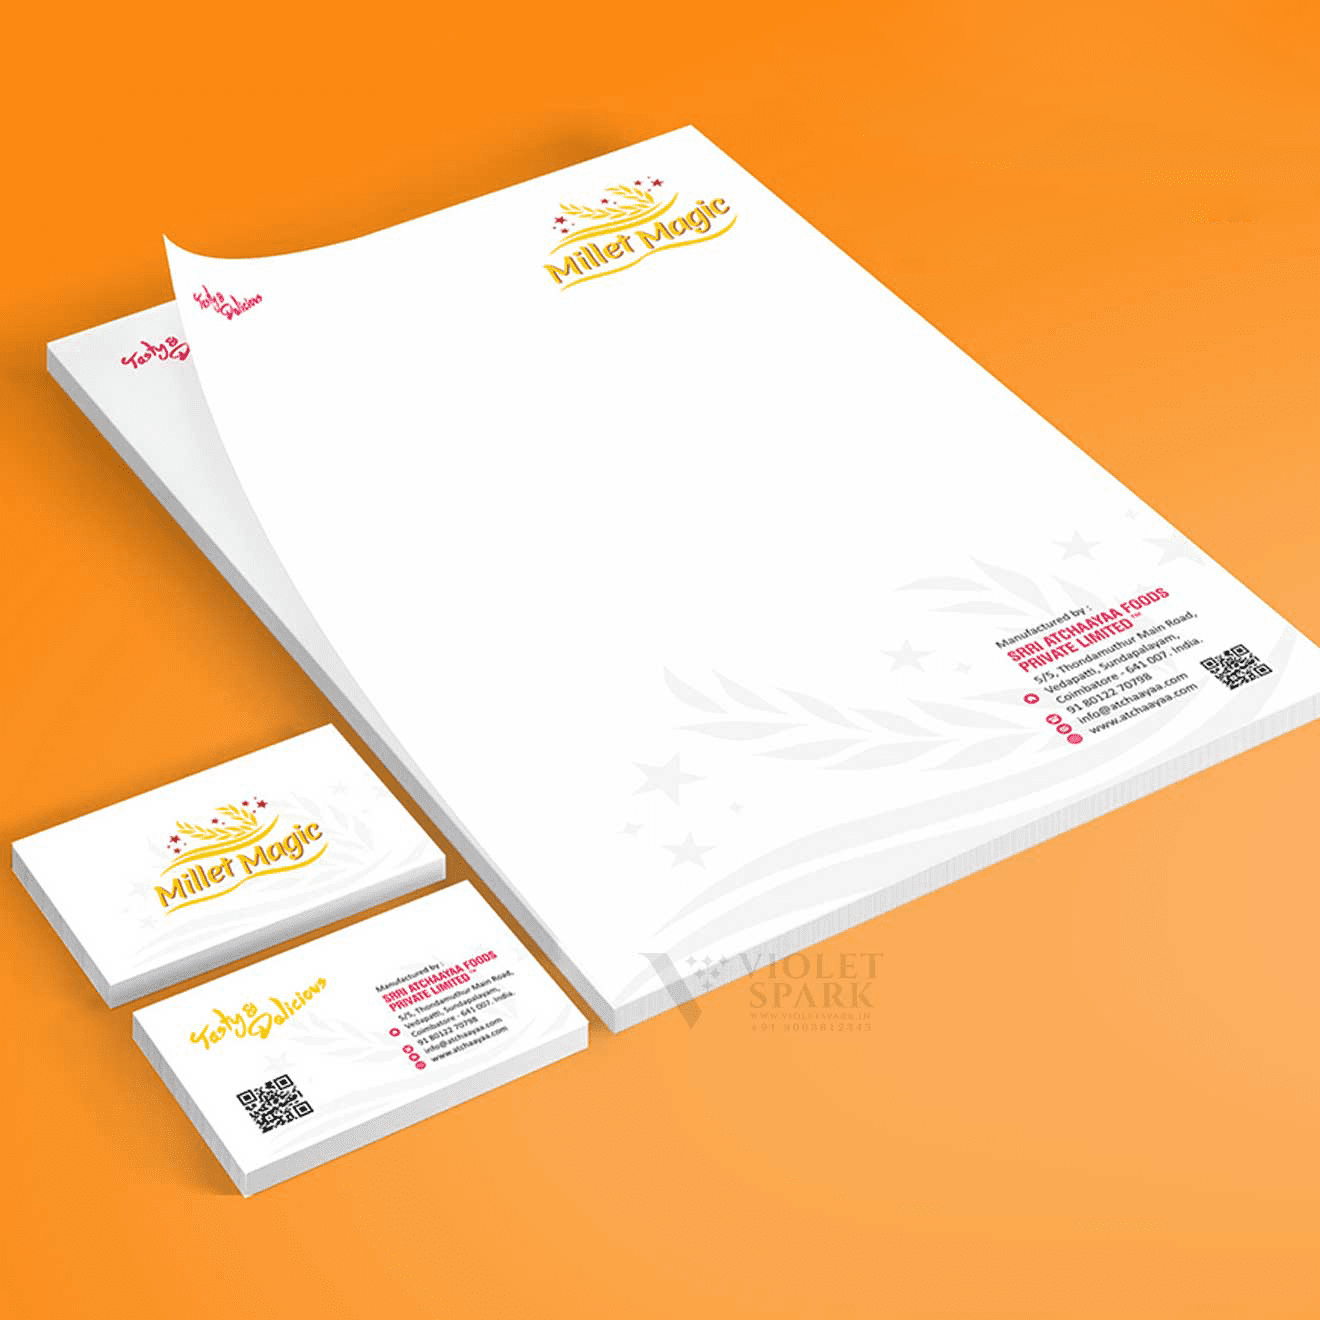 Millet Magic Letter Head and Visiting Card Graphic Design, Branding Packaging Design in Coimbatore by Creative Prints thecreativeprints